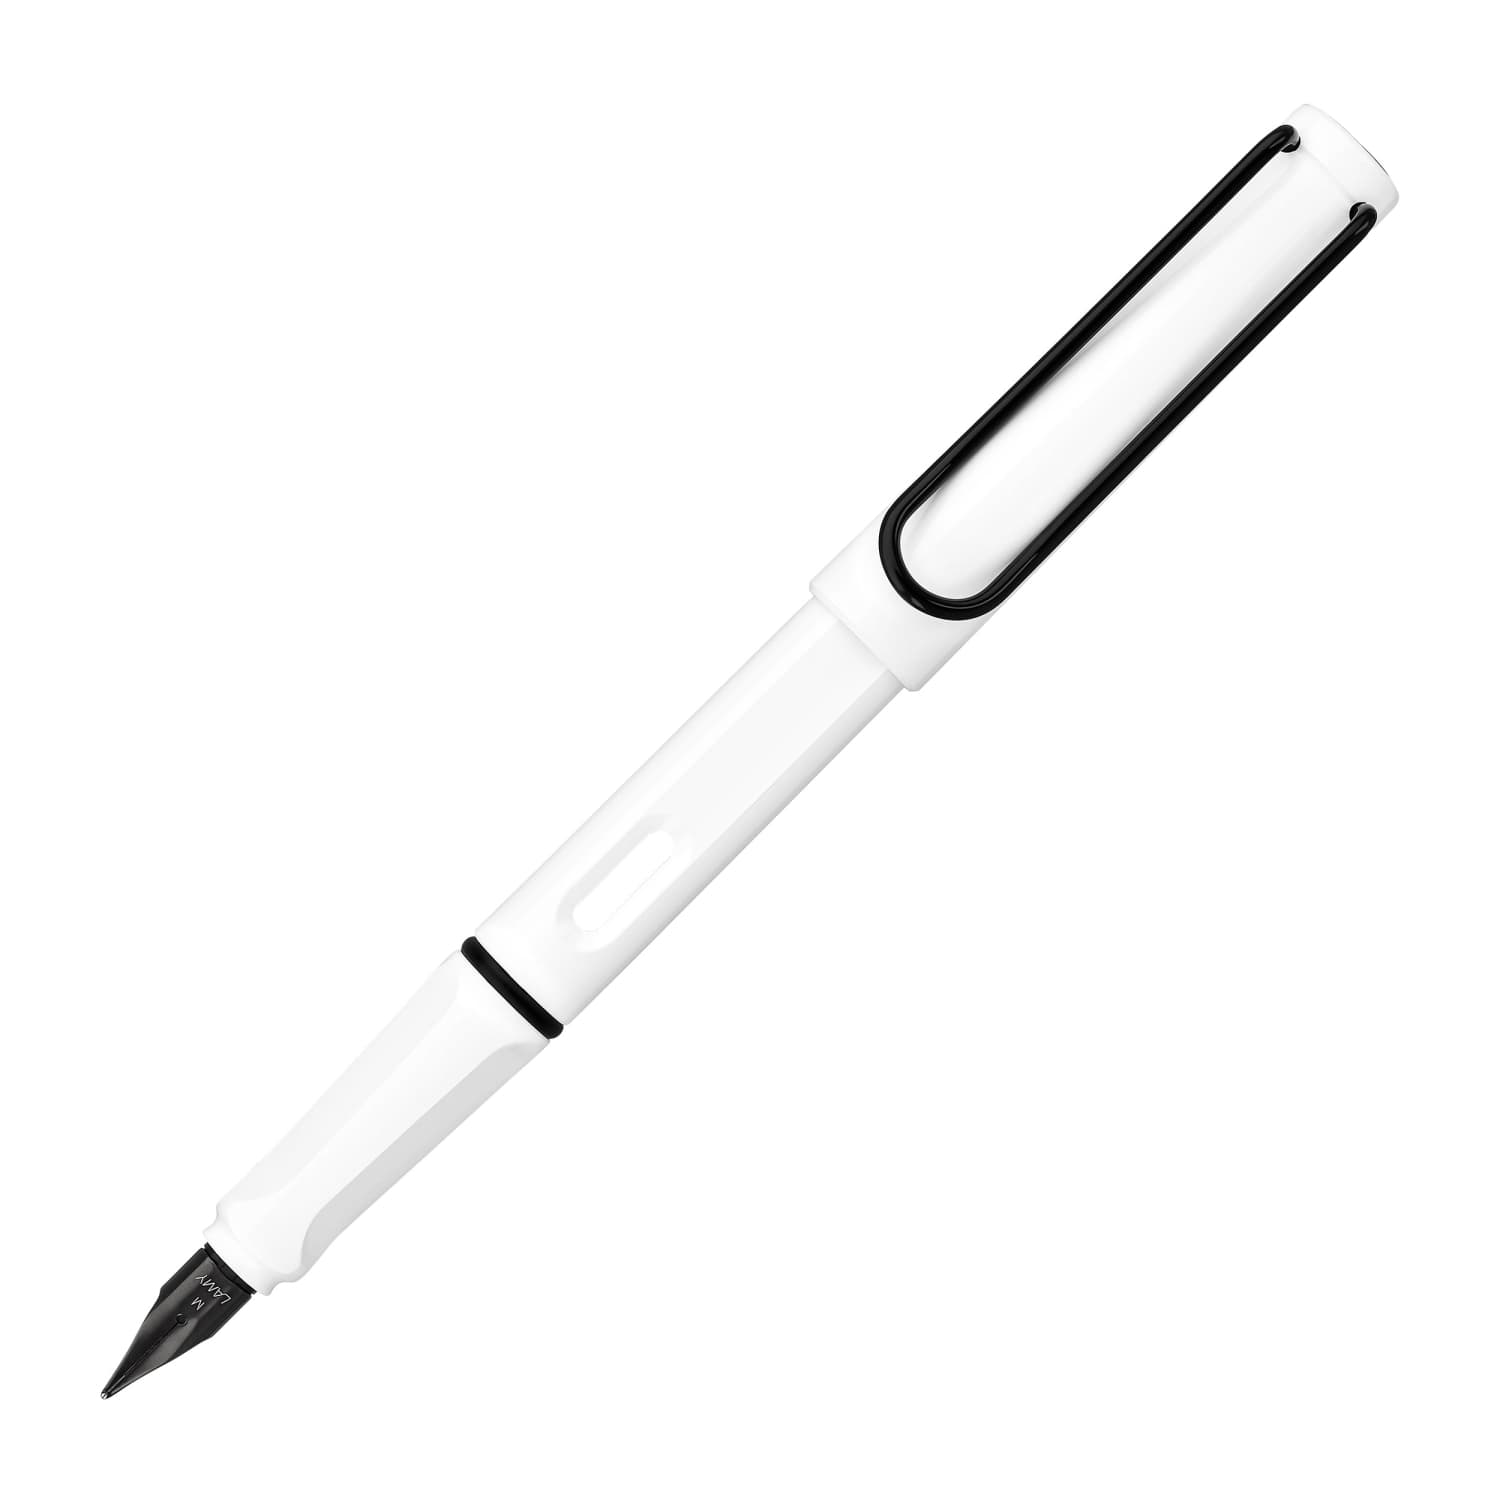 Industrial etching pen for hard metal (White lid)